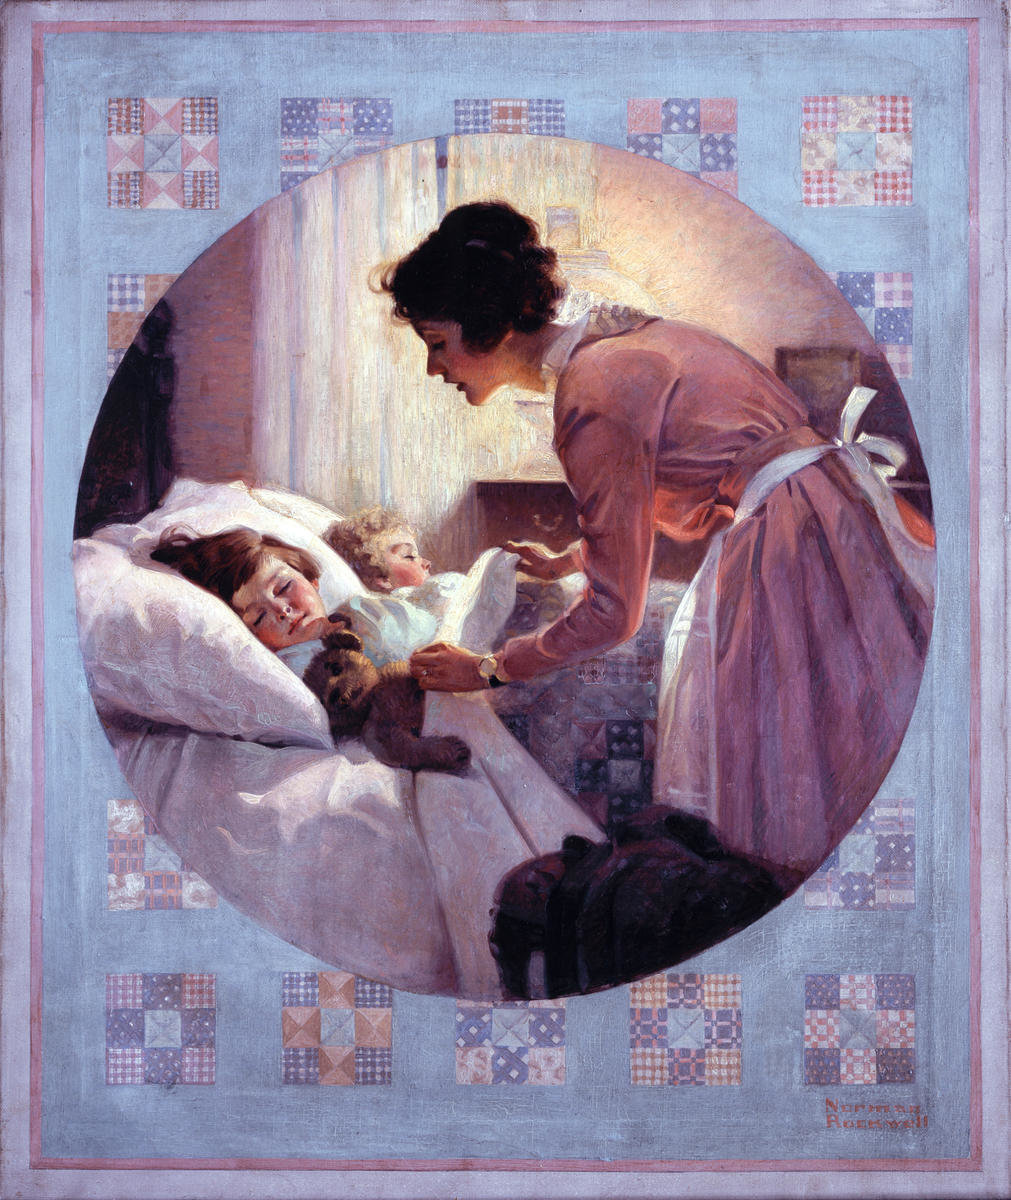 Mother's Little Angels (Mother Tucking Children Into Bed), 1920 by